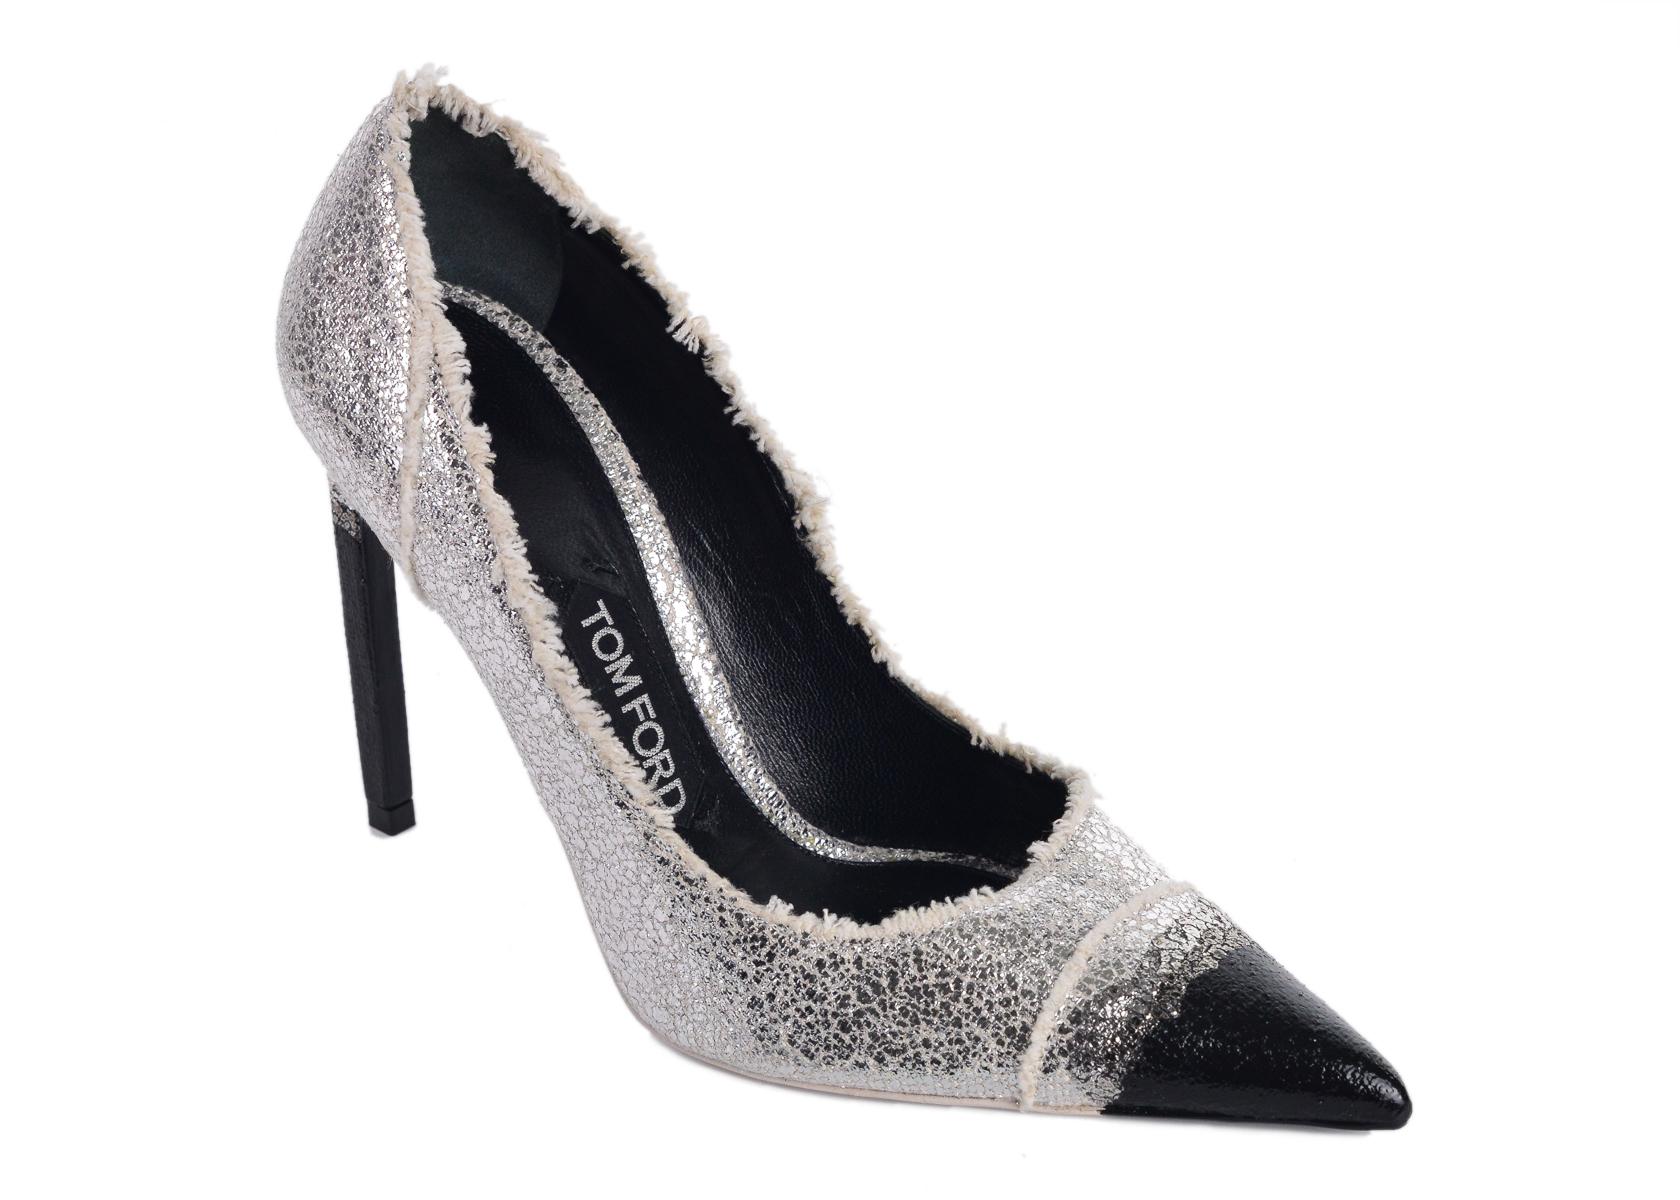 Tom Ford's frayed canvas pumps. These striking pumps feature a two tone black and metallic silver for a striking and stunning eye catching look. Beautifully crafted and can be paired with a black dress for the perfect completed night out look.

Tom